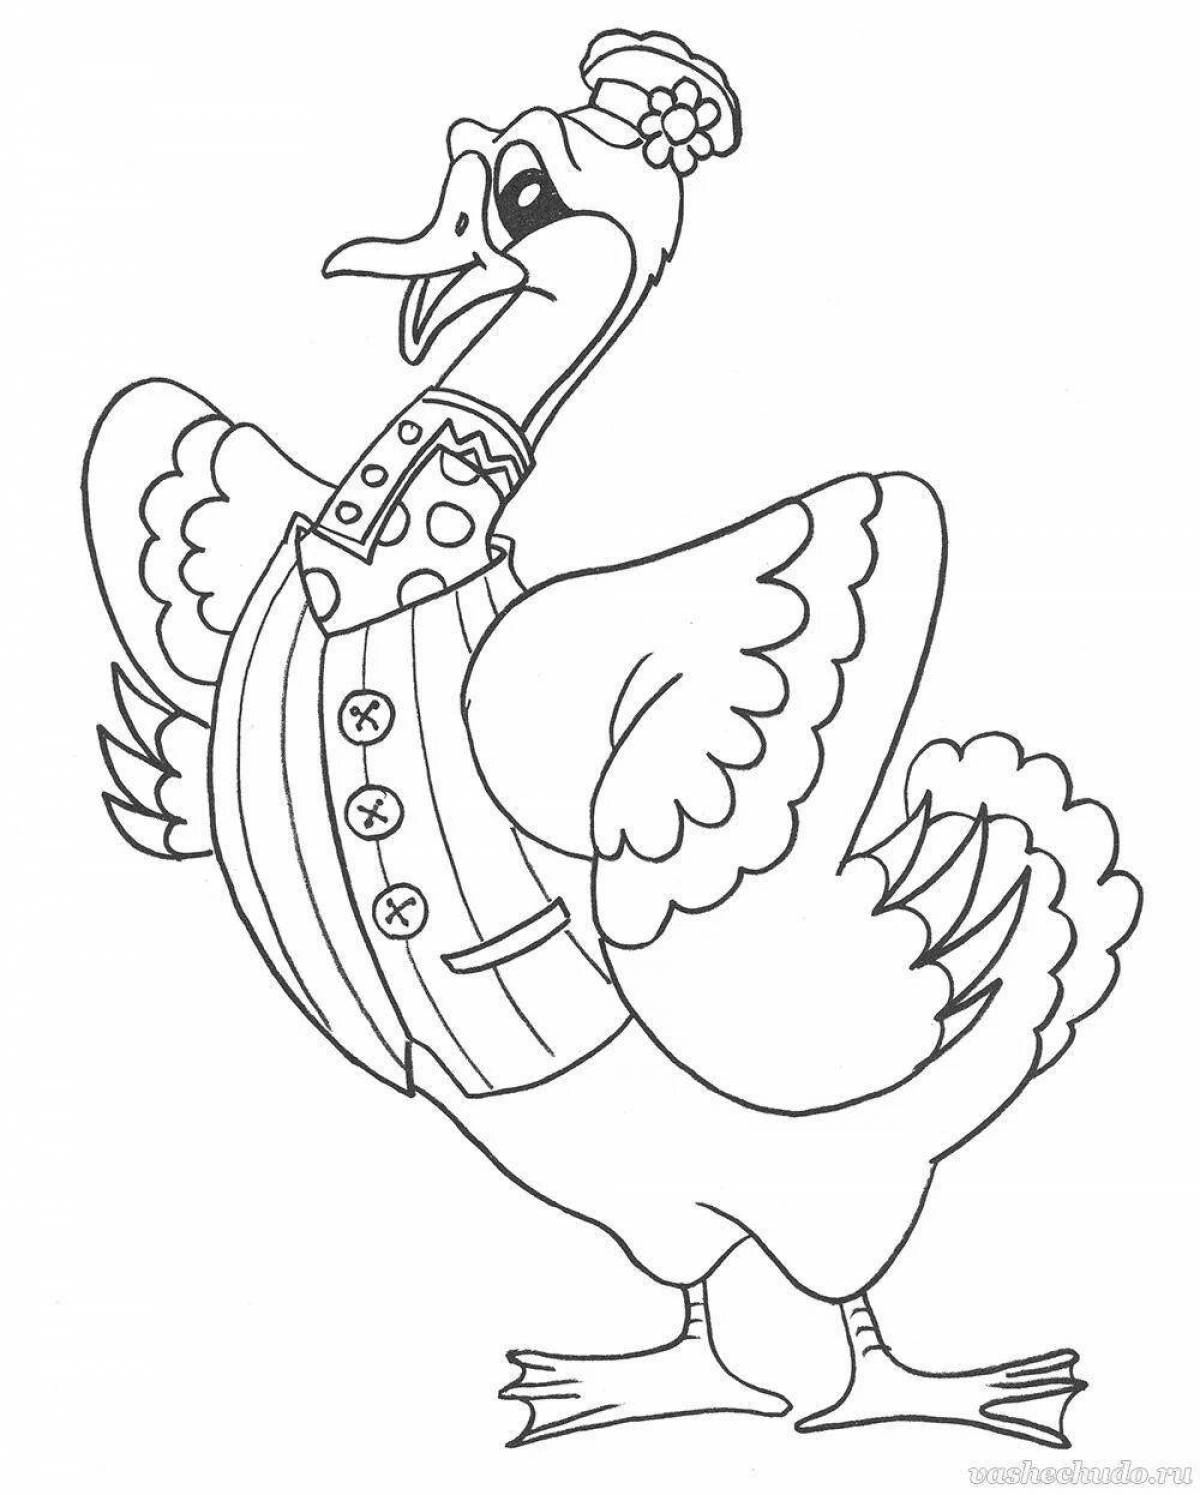 Awesome goose coloring page for kids